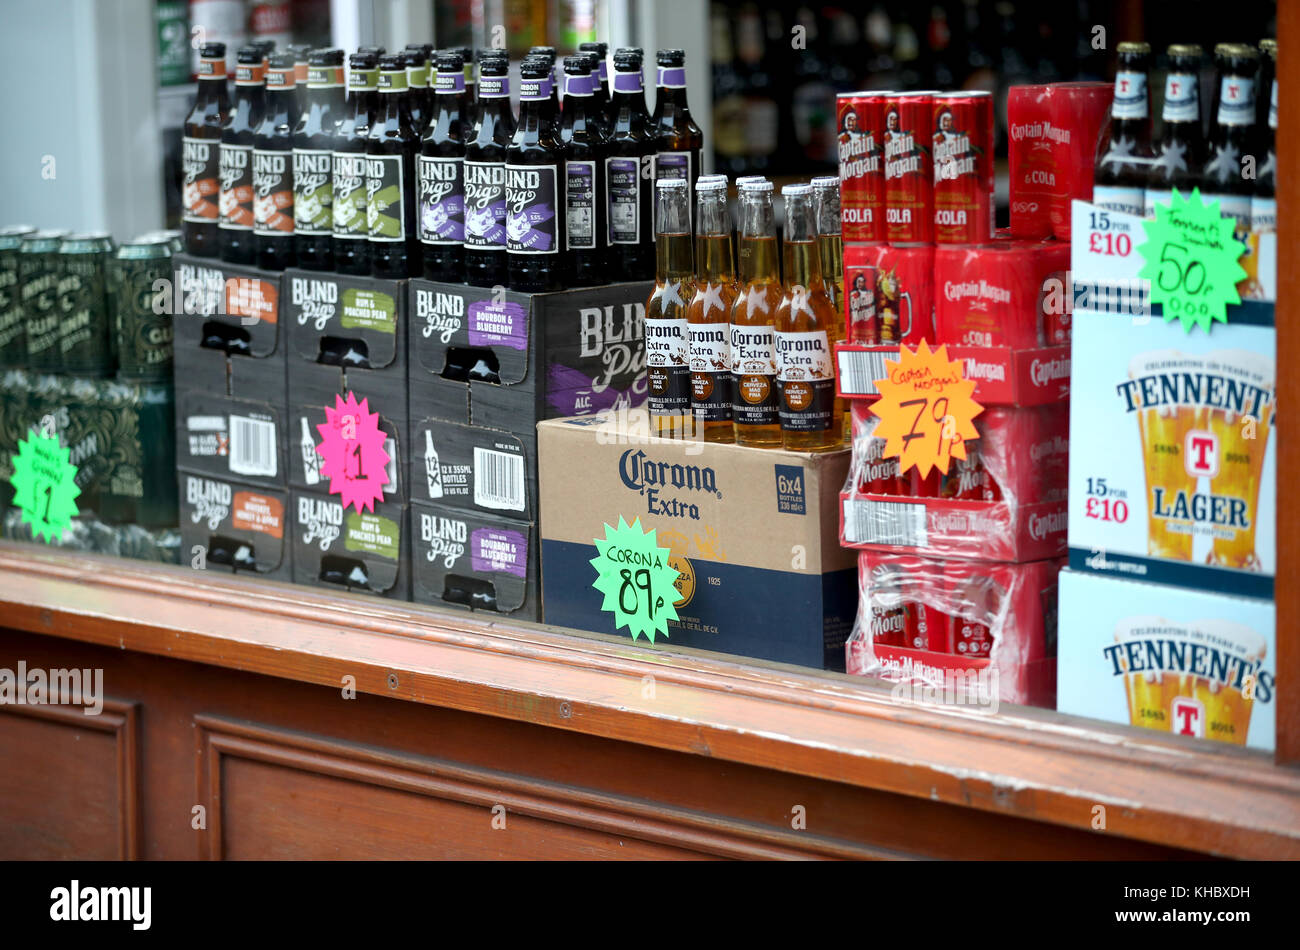 Alcohol for sale in an Edinburgh off-licence shop as Scotland will become the first country in the world to introduce minimum unit pricing for alcohol. Stock Photo